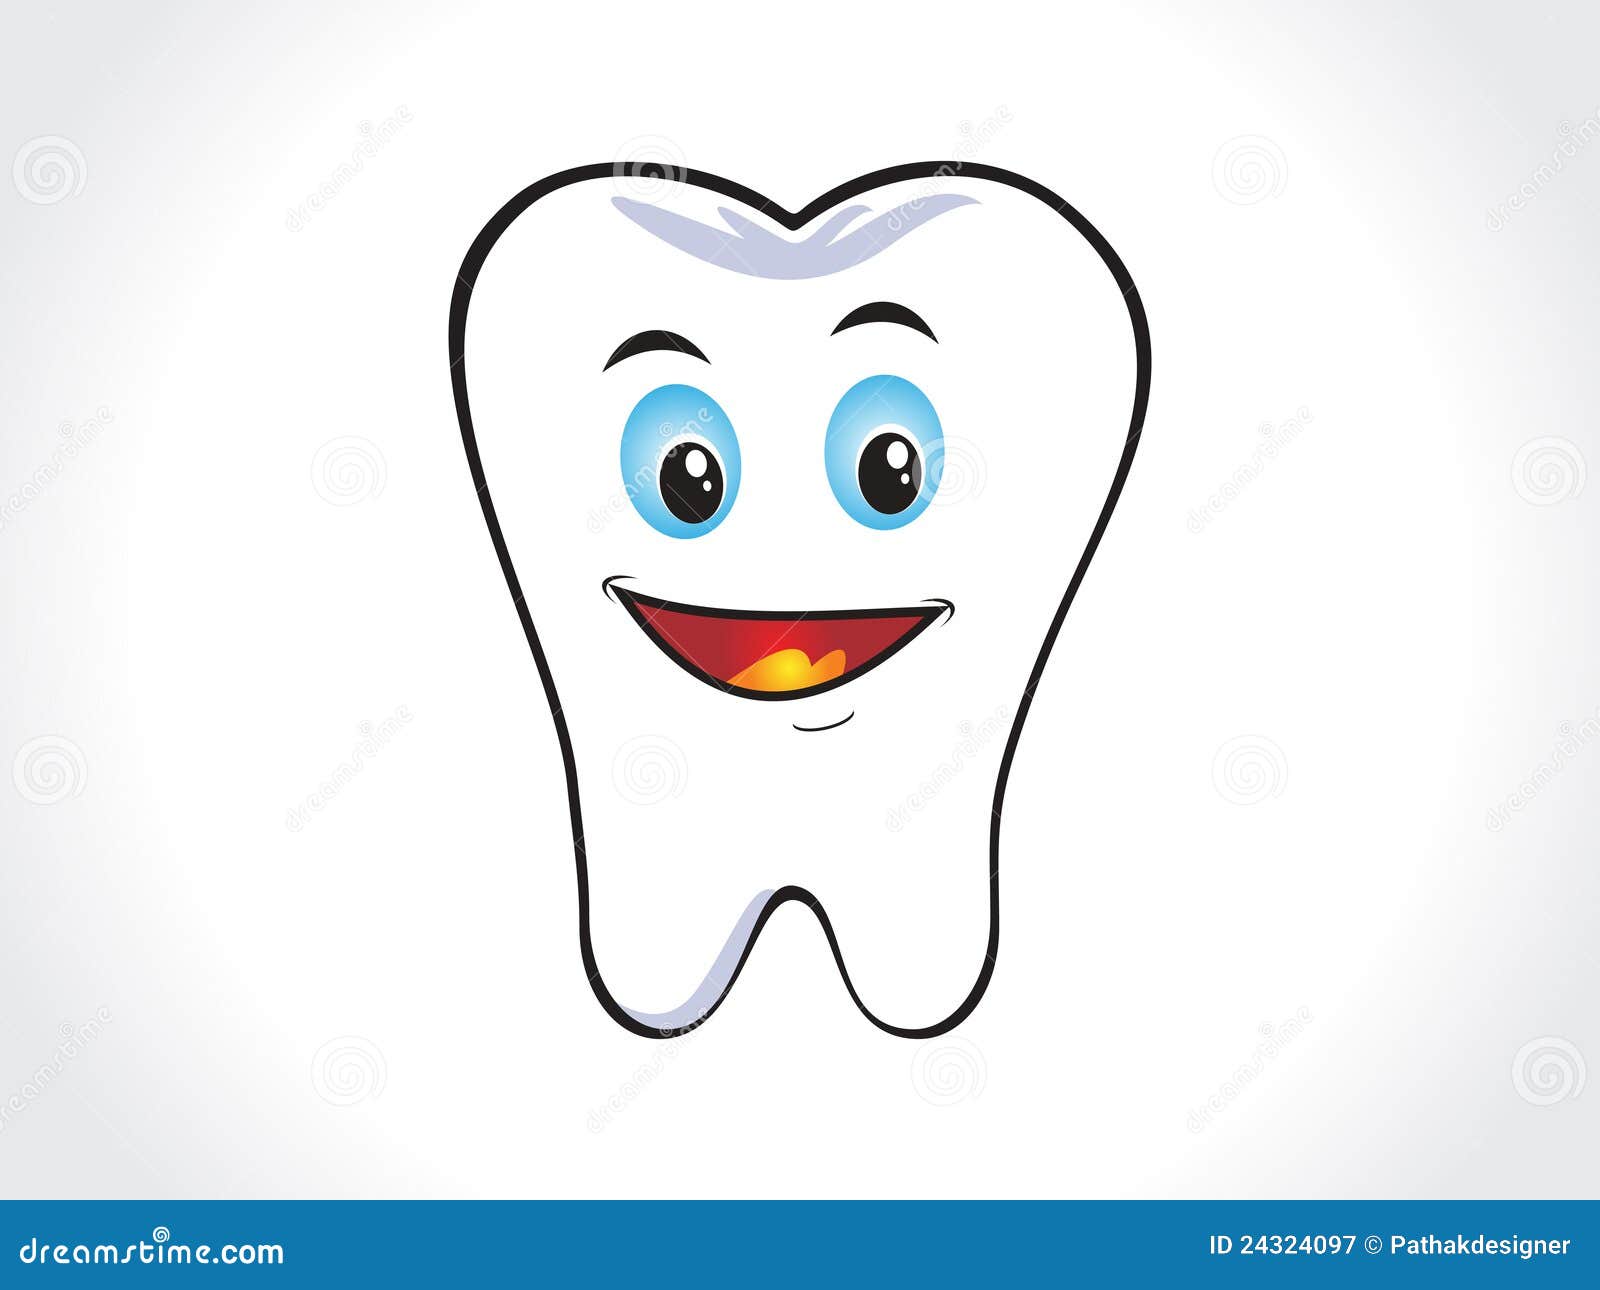 tooth caricature clip art - photo #32